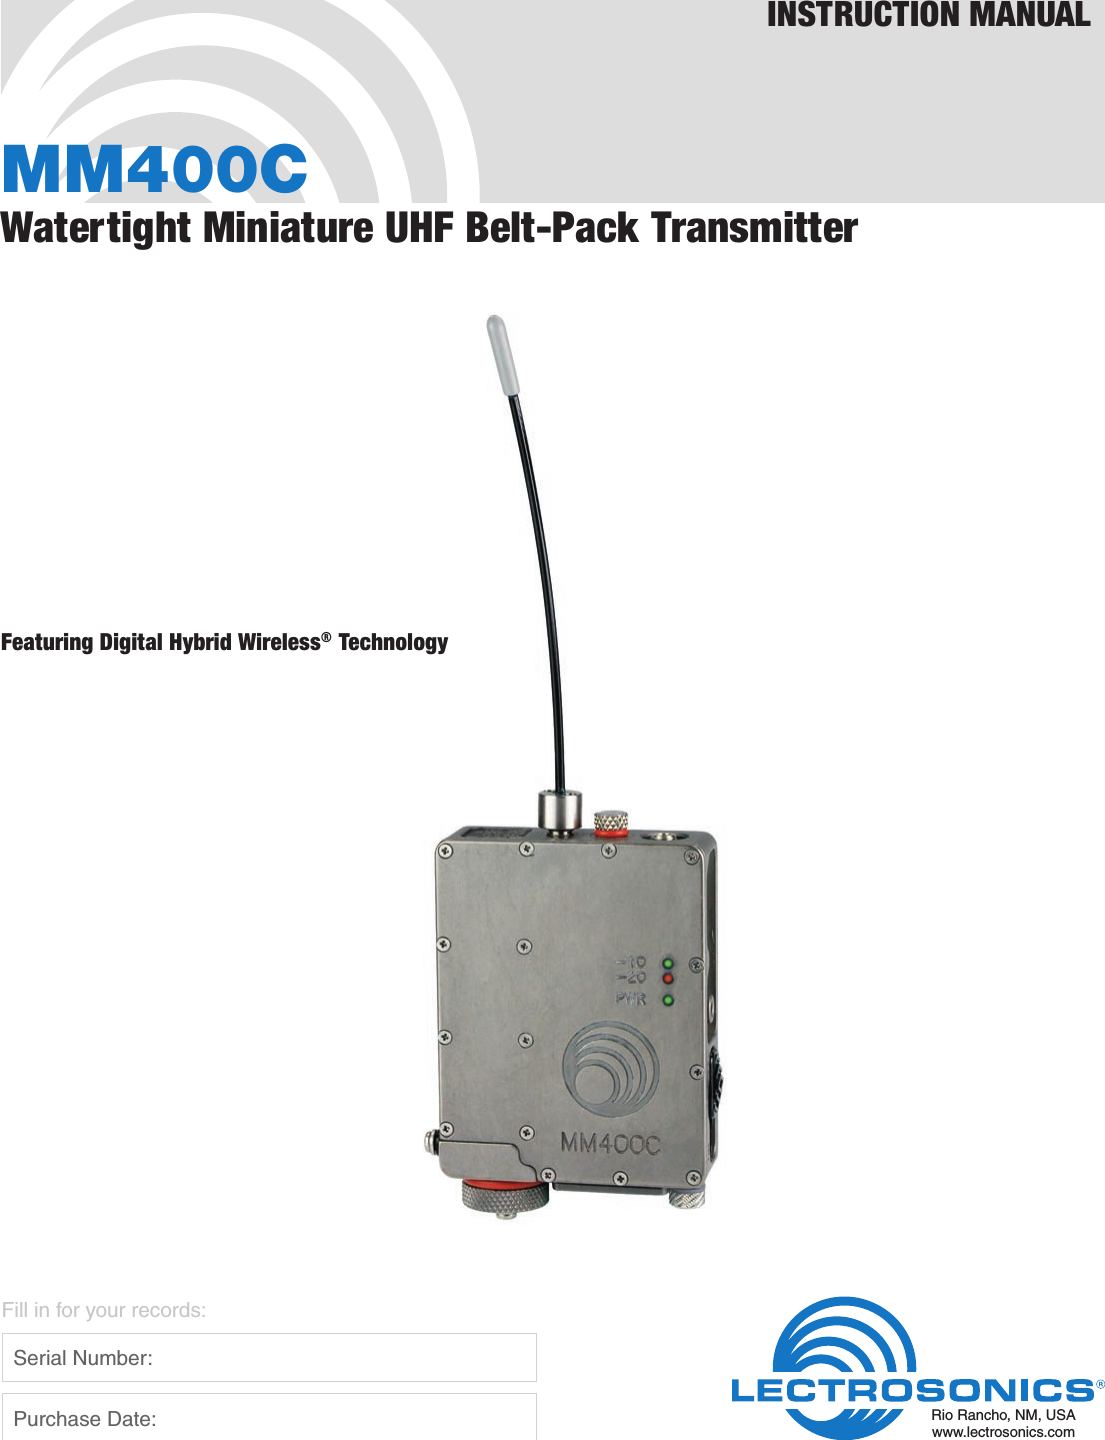 MM400CWatertight Miniature UHF Belt-Pack TransmitterFeaturing Digital Hybrid Wireless® TechnologyINSTRUCTION MANUALRio Rancho, NM, USAwww.lectrosonics.comFill in for your records:  Serial Number:  Purchase Date: